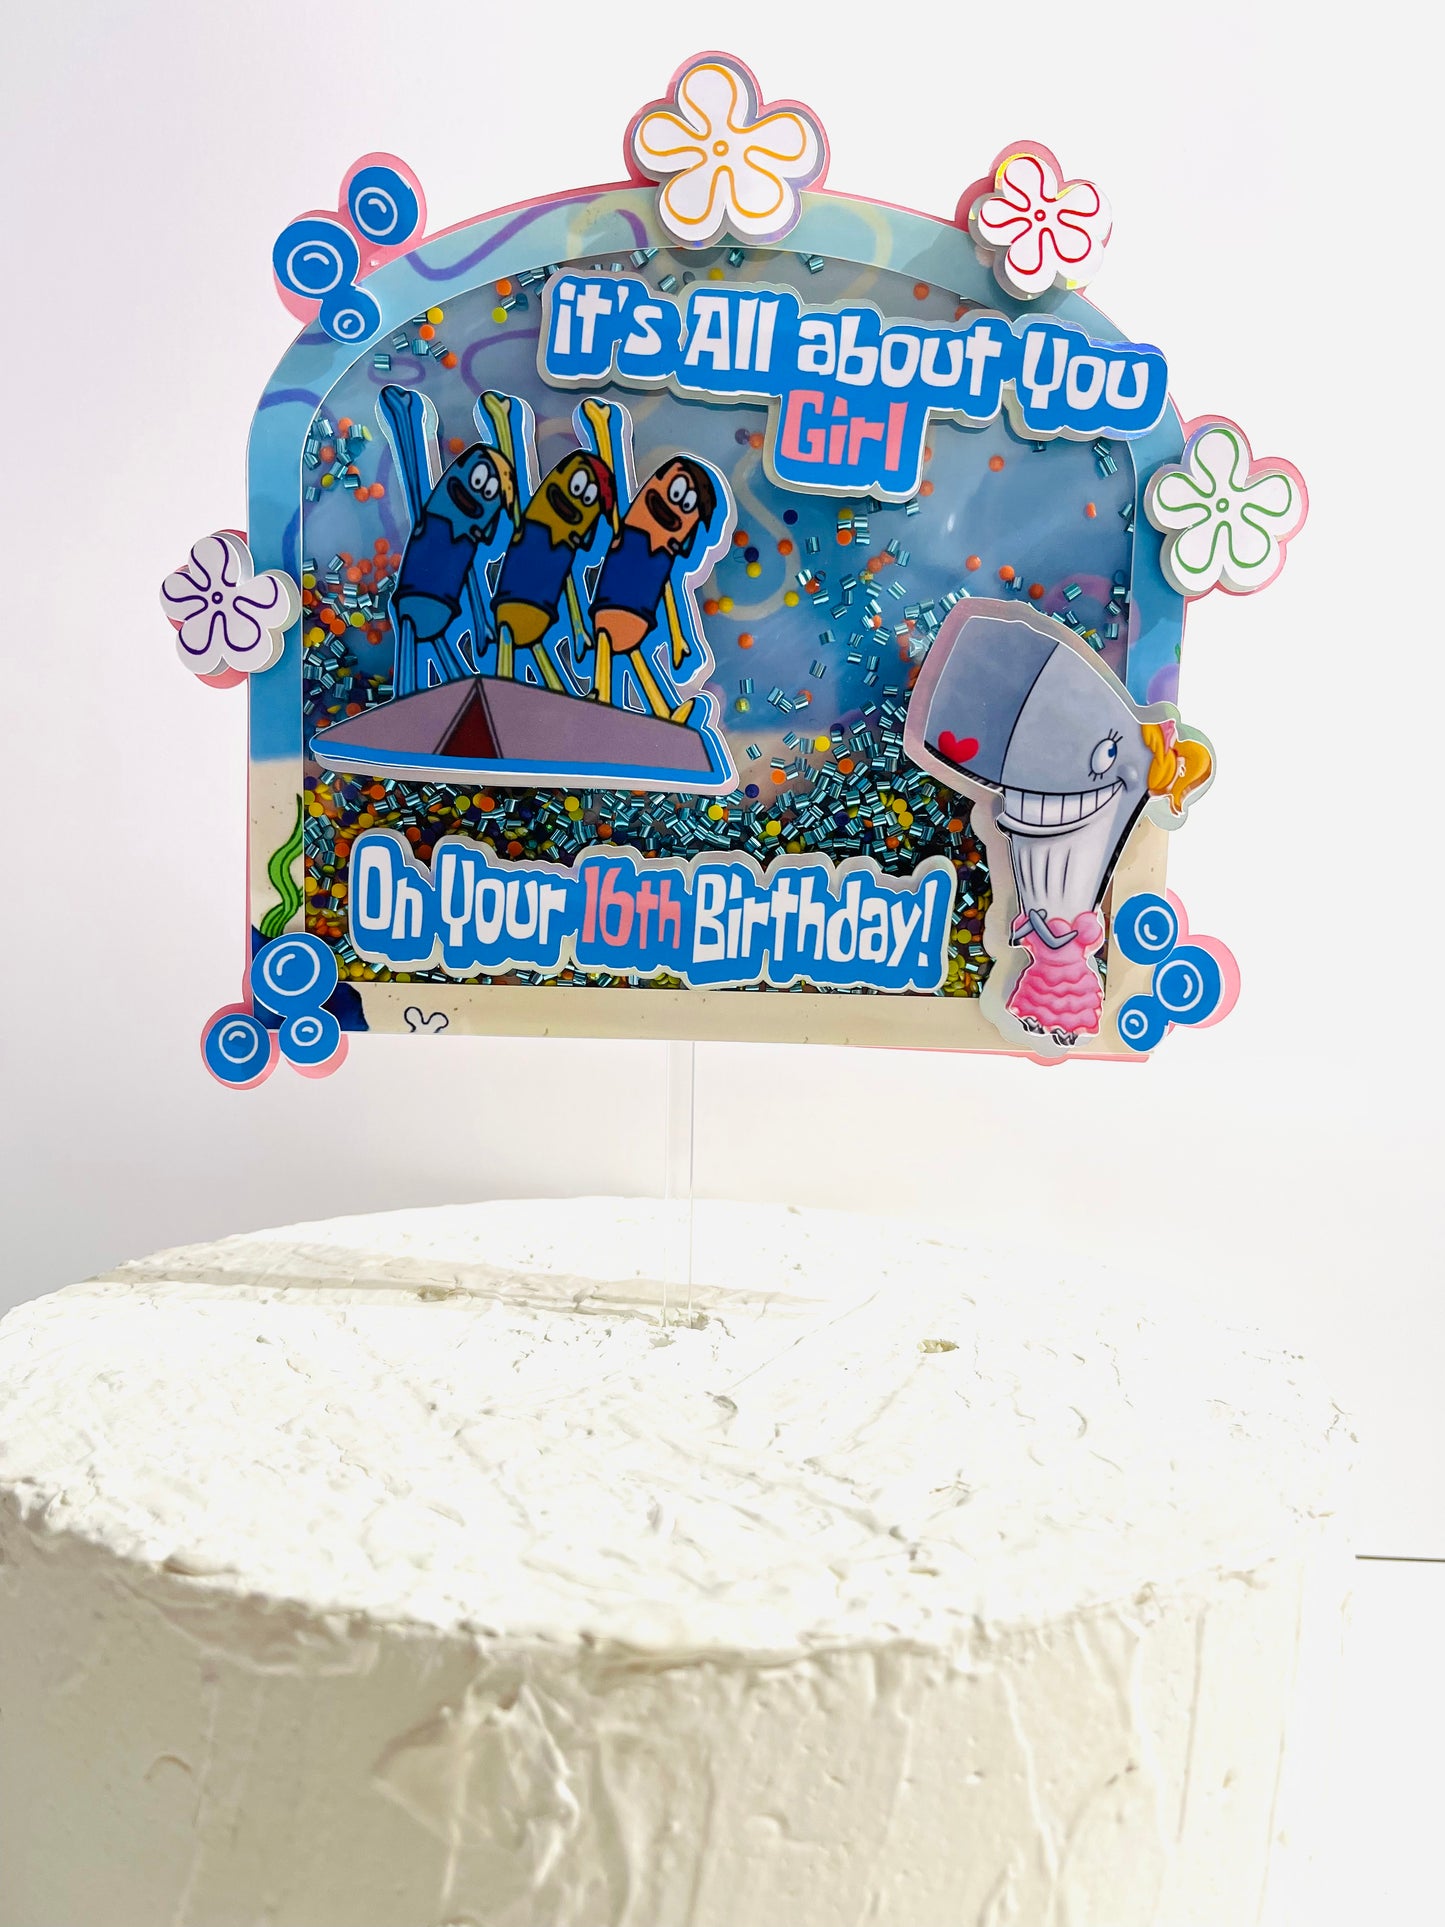 It's all about you girl....on your 16th Birthday Cake topper Shaker